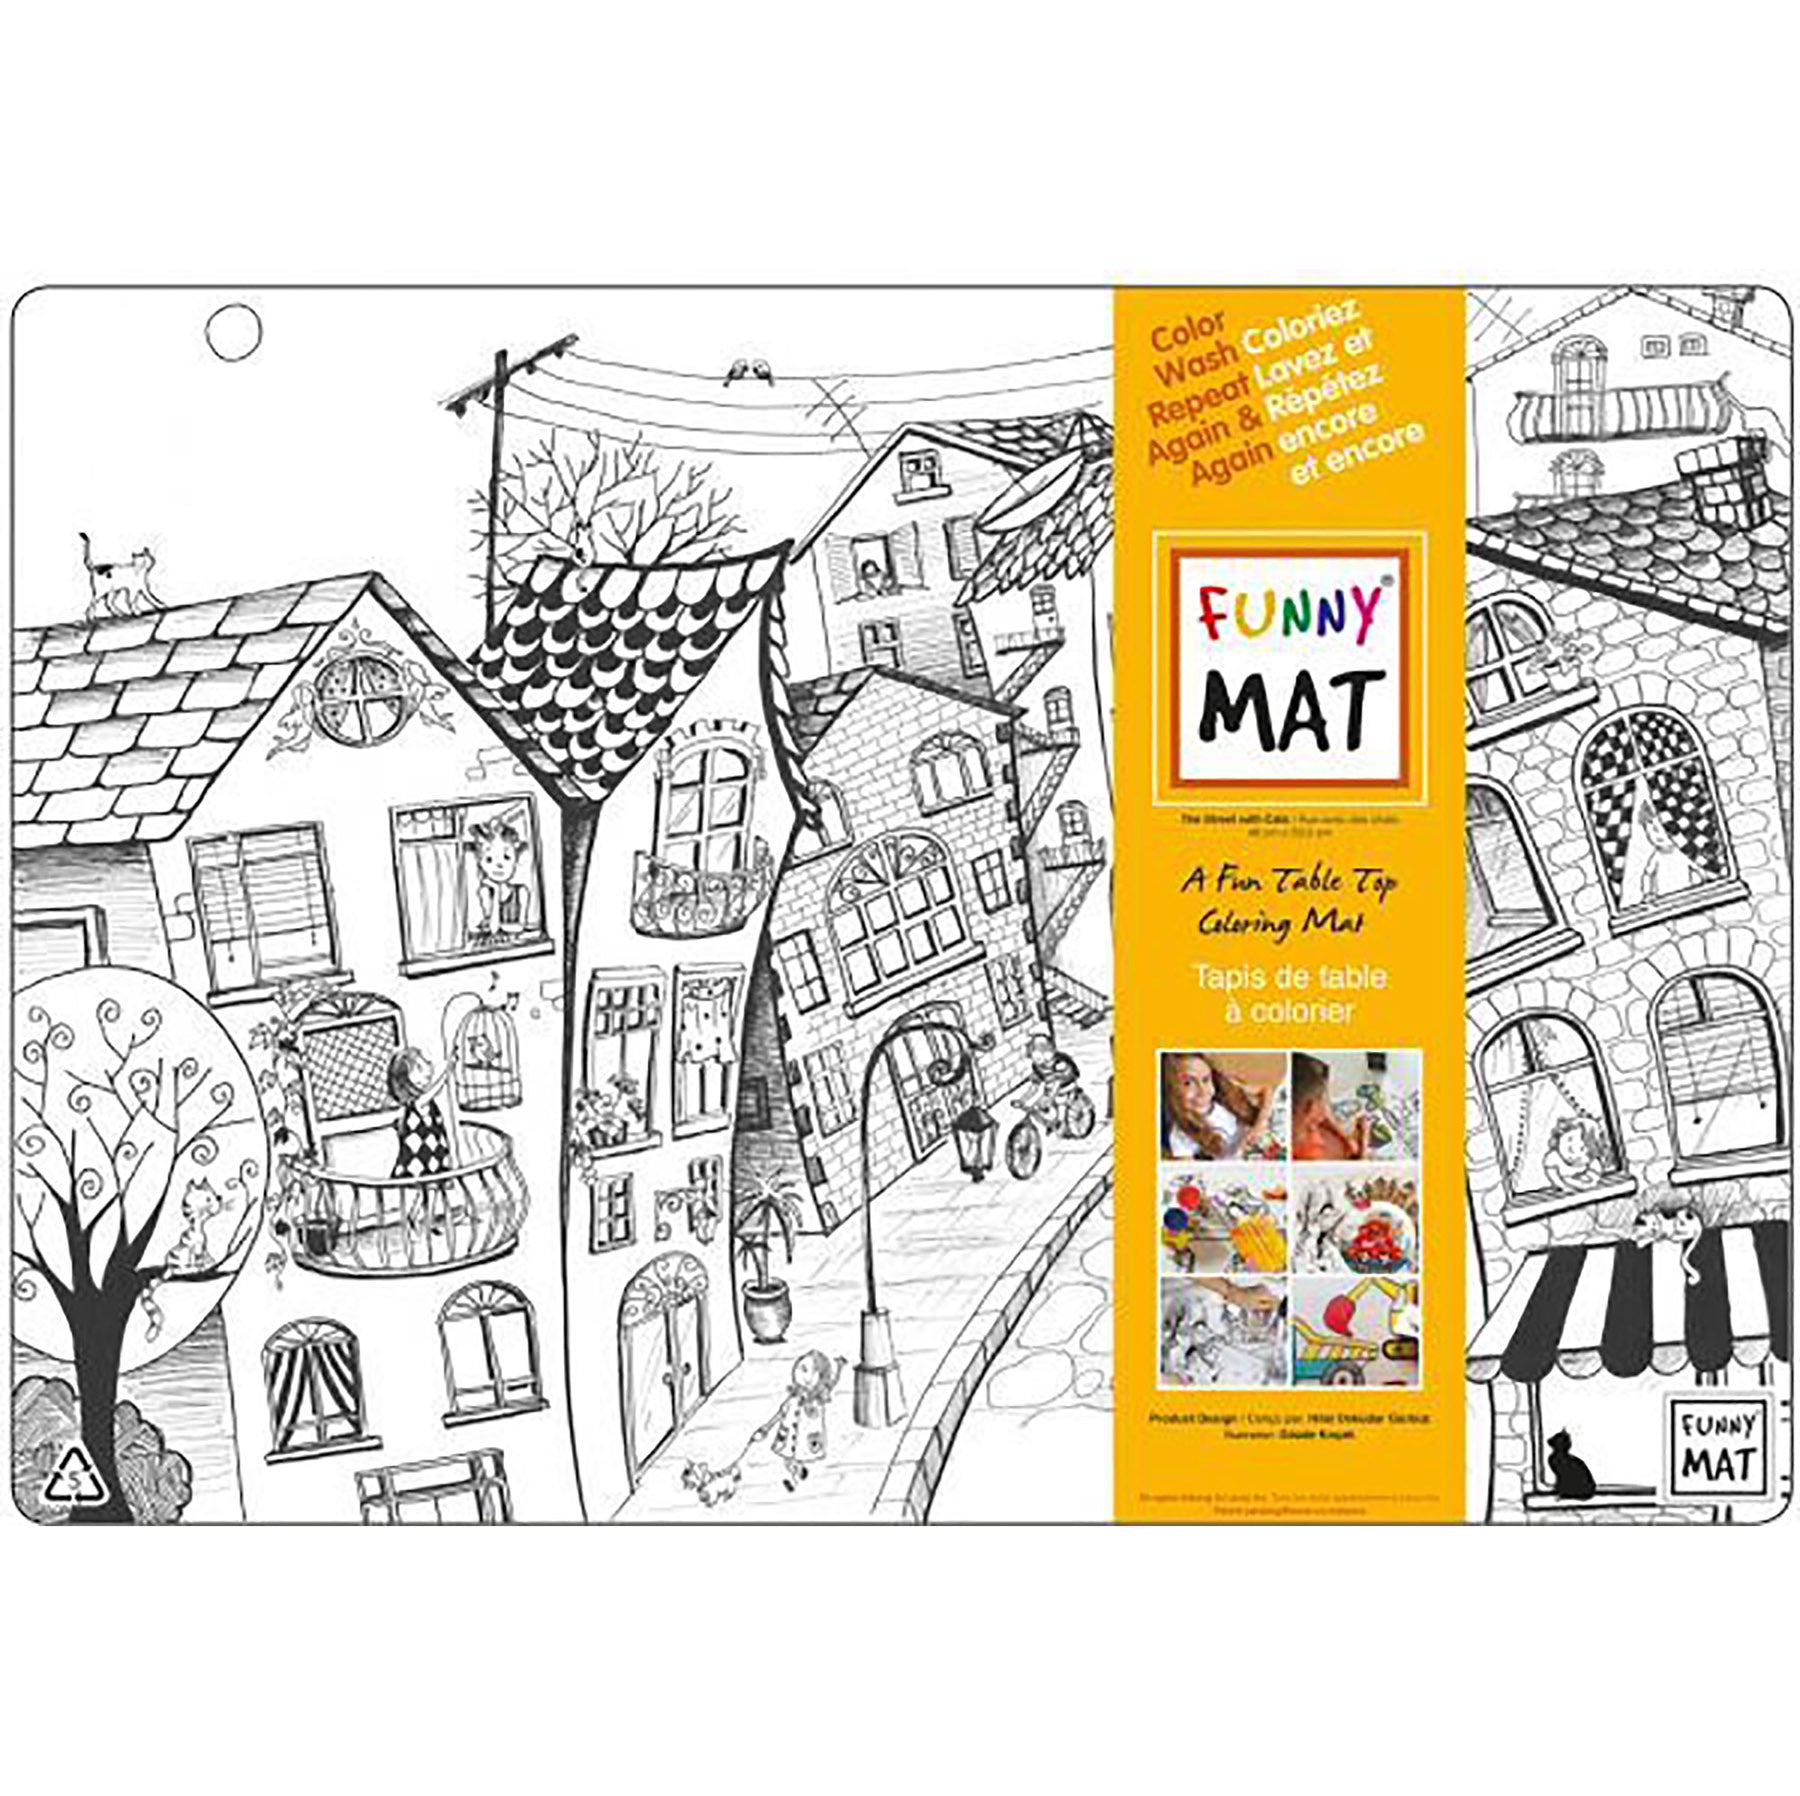 Funny Mat Coloring Placemat - Streetcat 18.9x13.2in